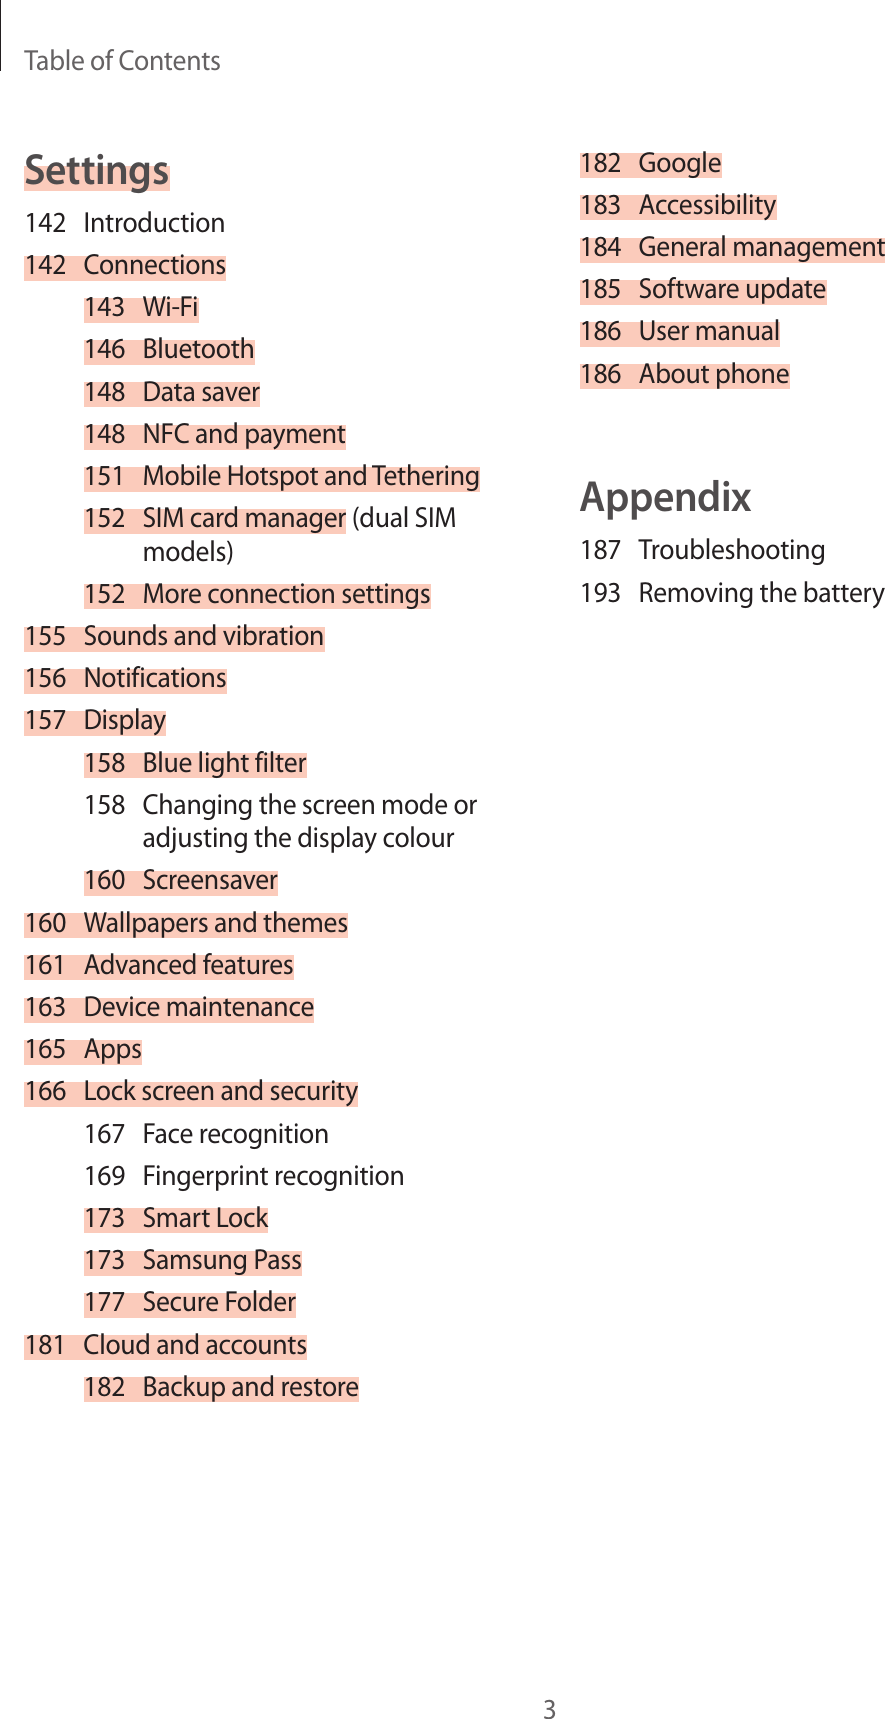 Table of Contents3182 Google183 Accessibility184  General management185  Software update186  User manual186  About phoneAppendix187 Troubleshooting193  Removing the batterySettings142 Introduction142 Connections143 Wi-Fi146 Bluetooth148  Data saver148  NFC and payment151  Mobile Hotspot and Tethering152  SIM card manager (dual SIM models)152  More connection settings155  Sounds and vibration156 Notifications157 Display158  Blue light filter158  Changing the screen mode or adjusting the display colour160 Screensaver160  Wallpapers and themes161  Advanced features163  Device maintenance165 Apps166  Lock screen and security167  Face recognition169  Fingerprint recognition173  Smart Lock173  Samsung Pass177  Secure Folder181  Cloud and accounts182  Backup and restore